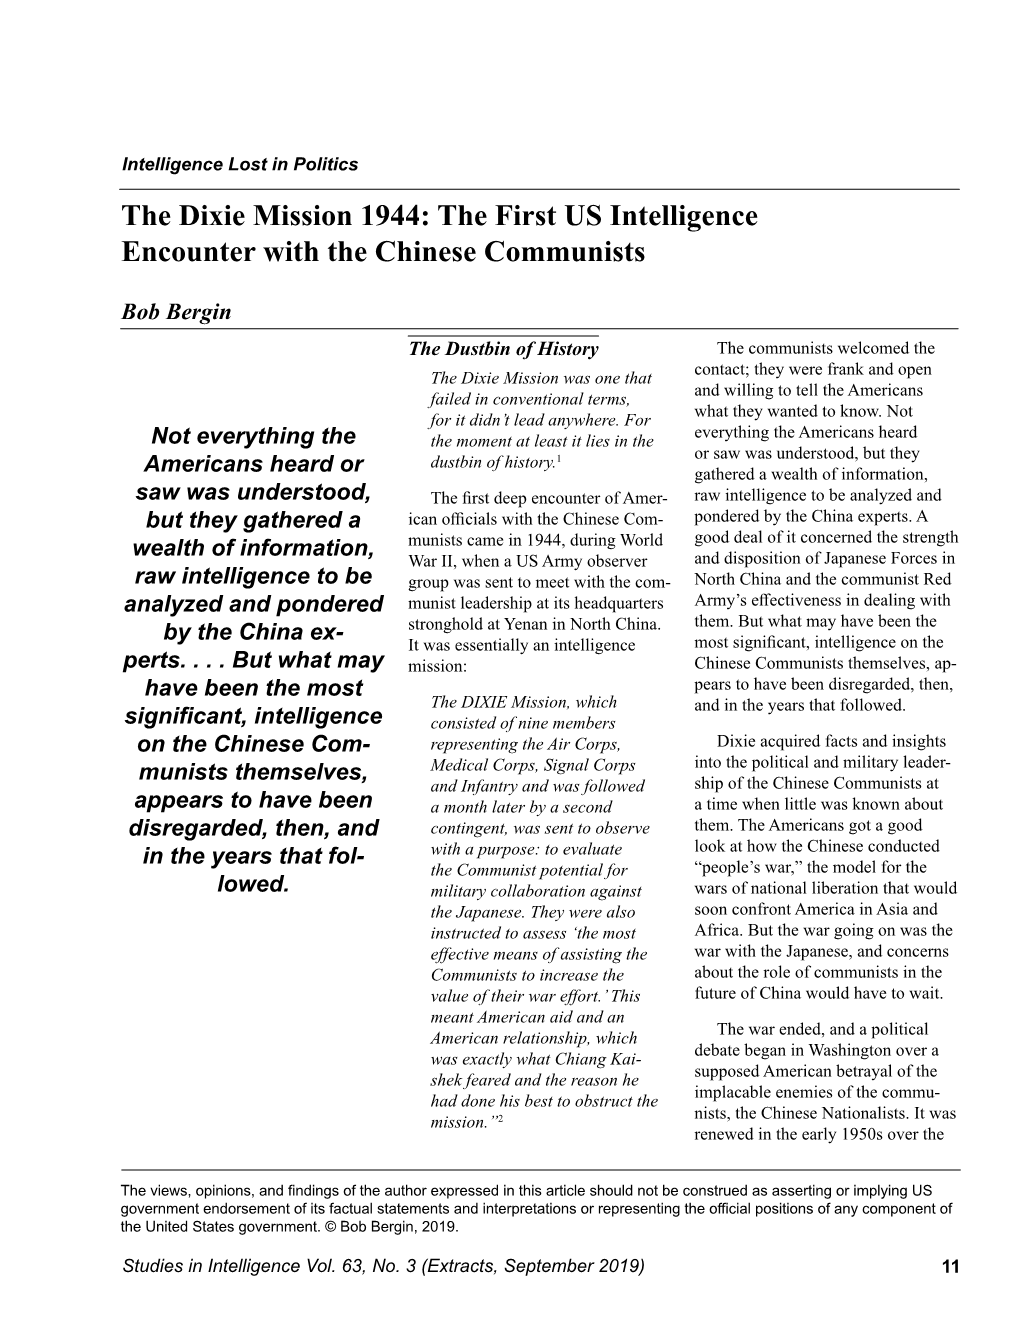 Dixie Mission 1944: the First US Intelligence Encounter with the Chinese Communists